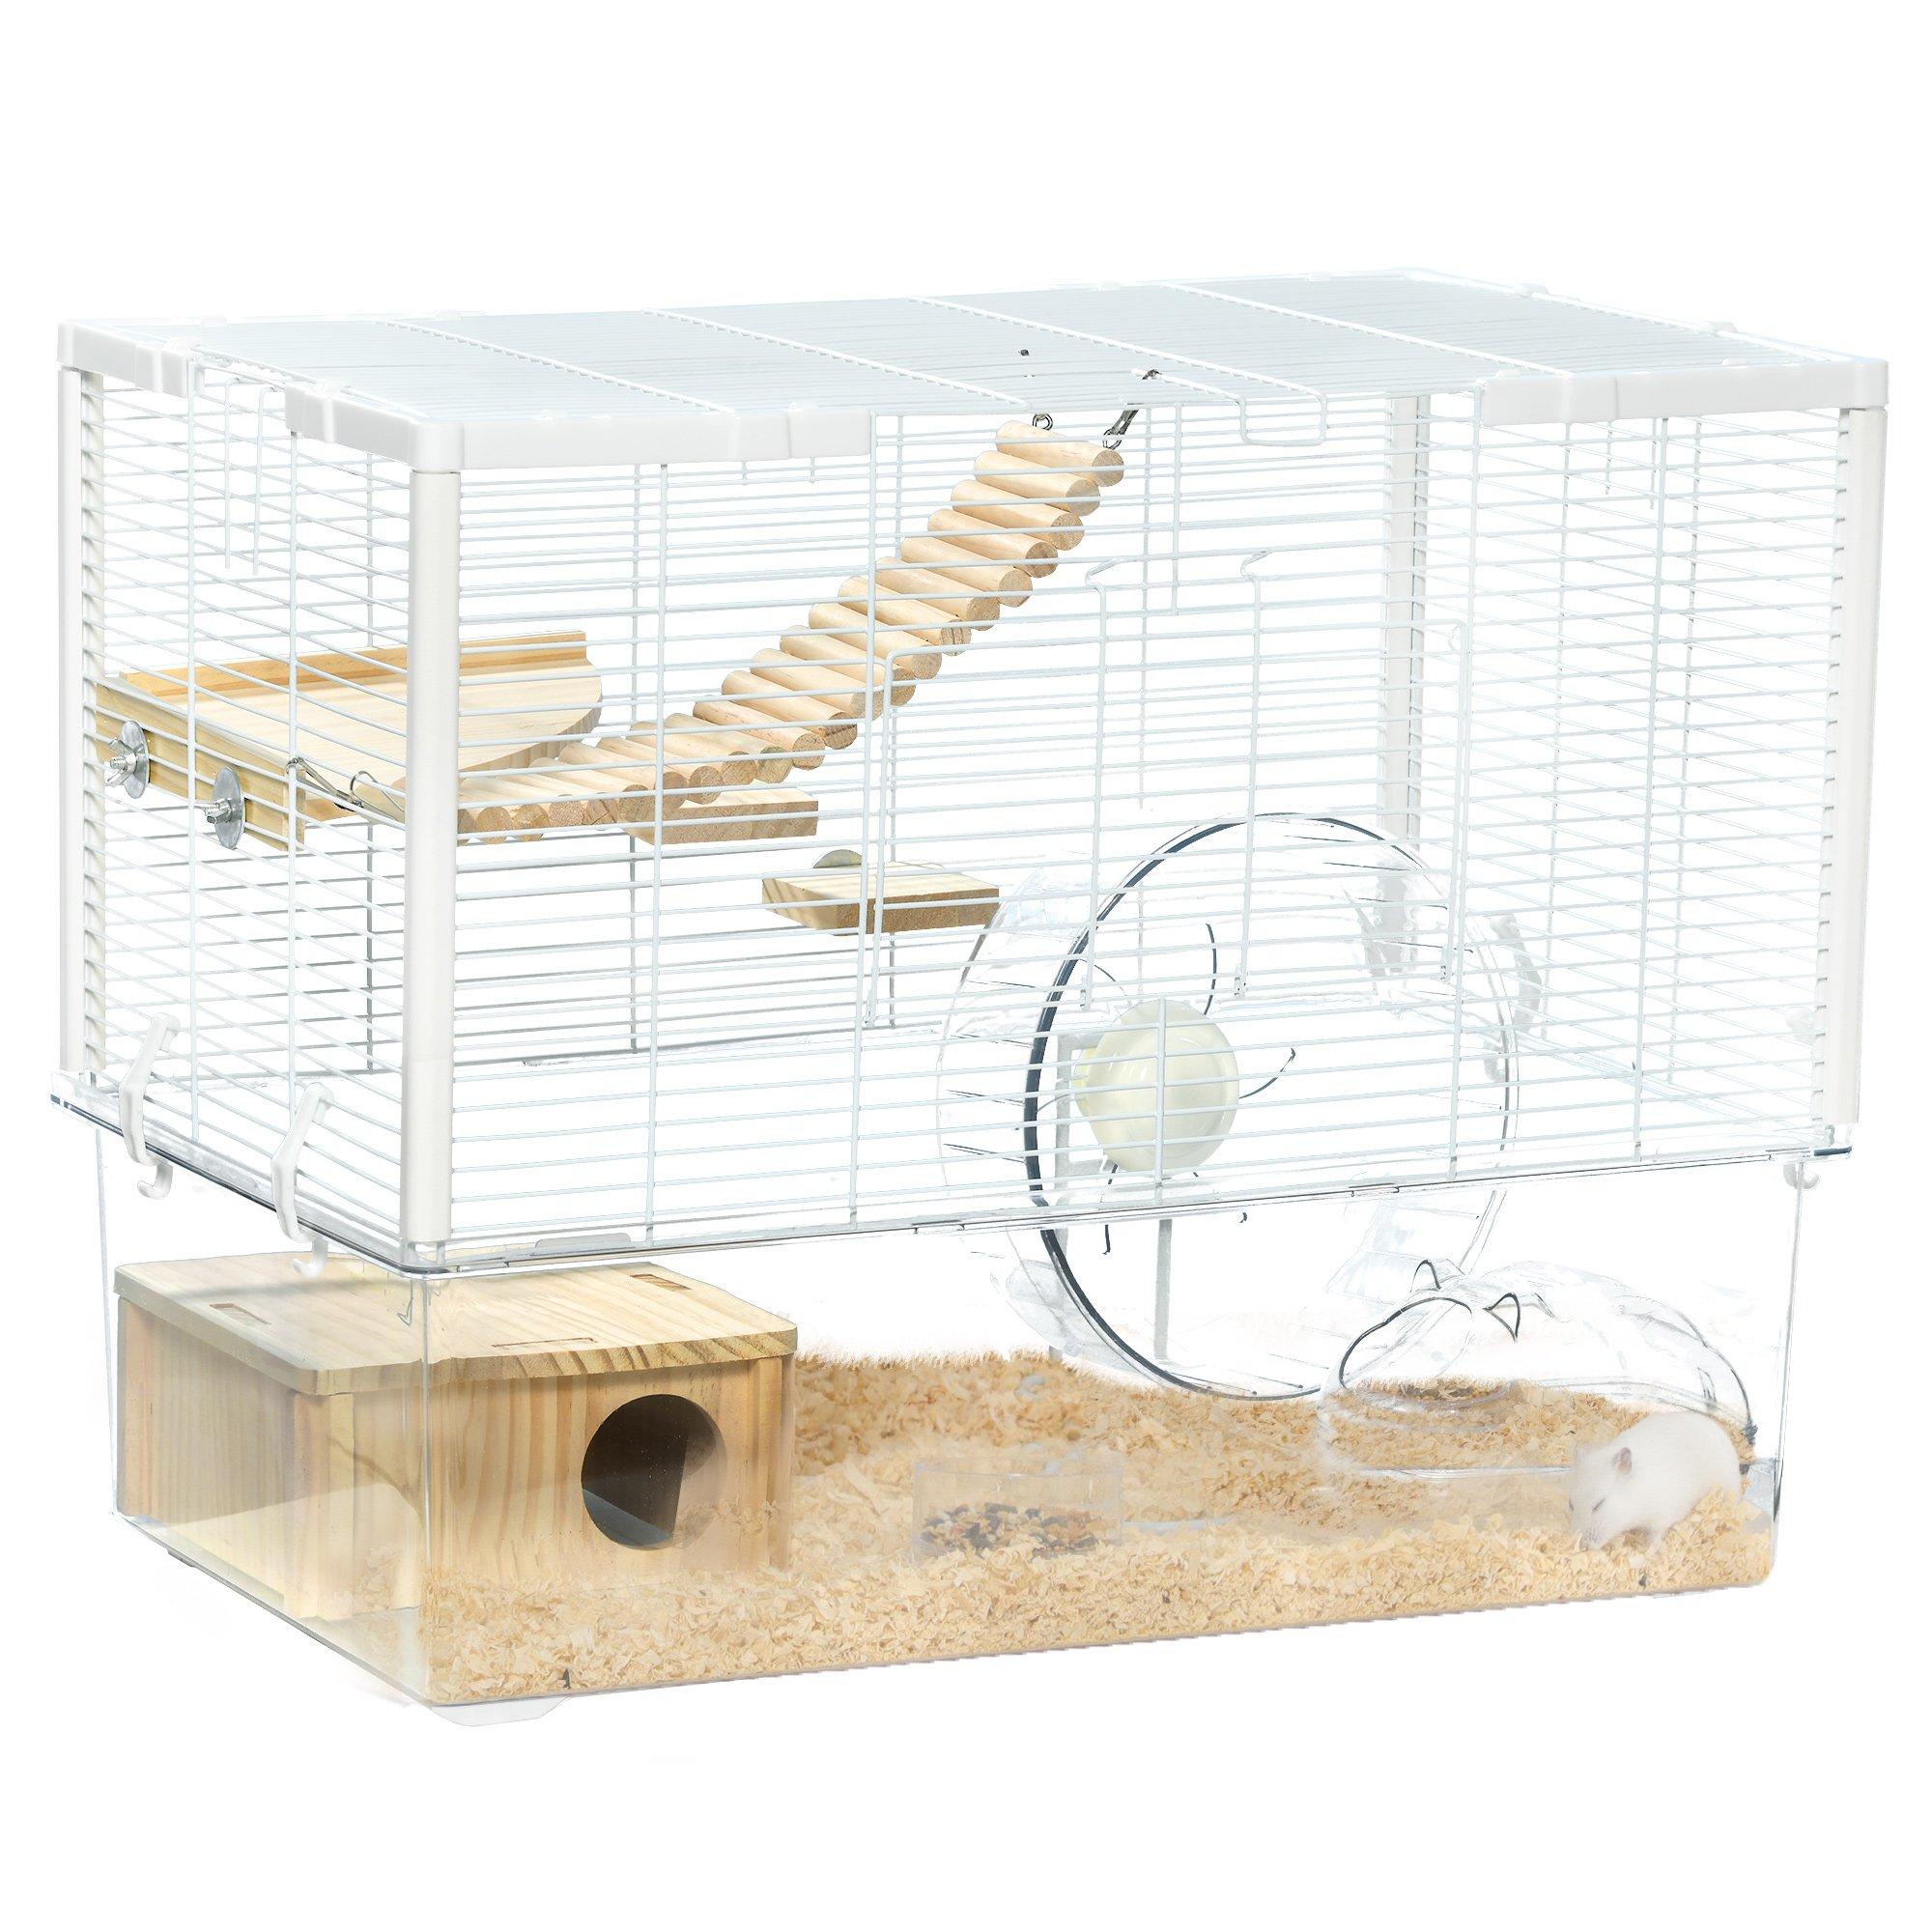 Hamster Cage, Gerbil Cage with Deep Bottom, Wooden Ramp, Hut